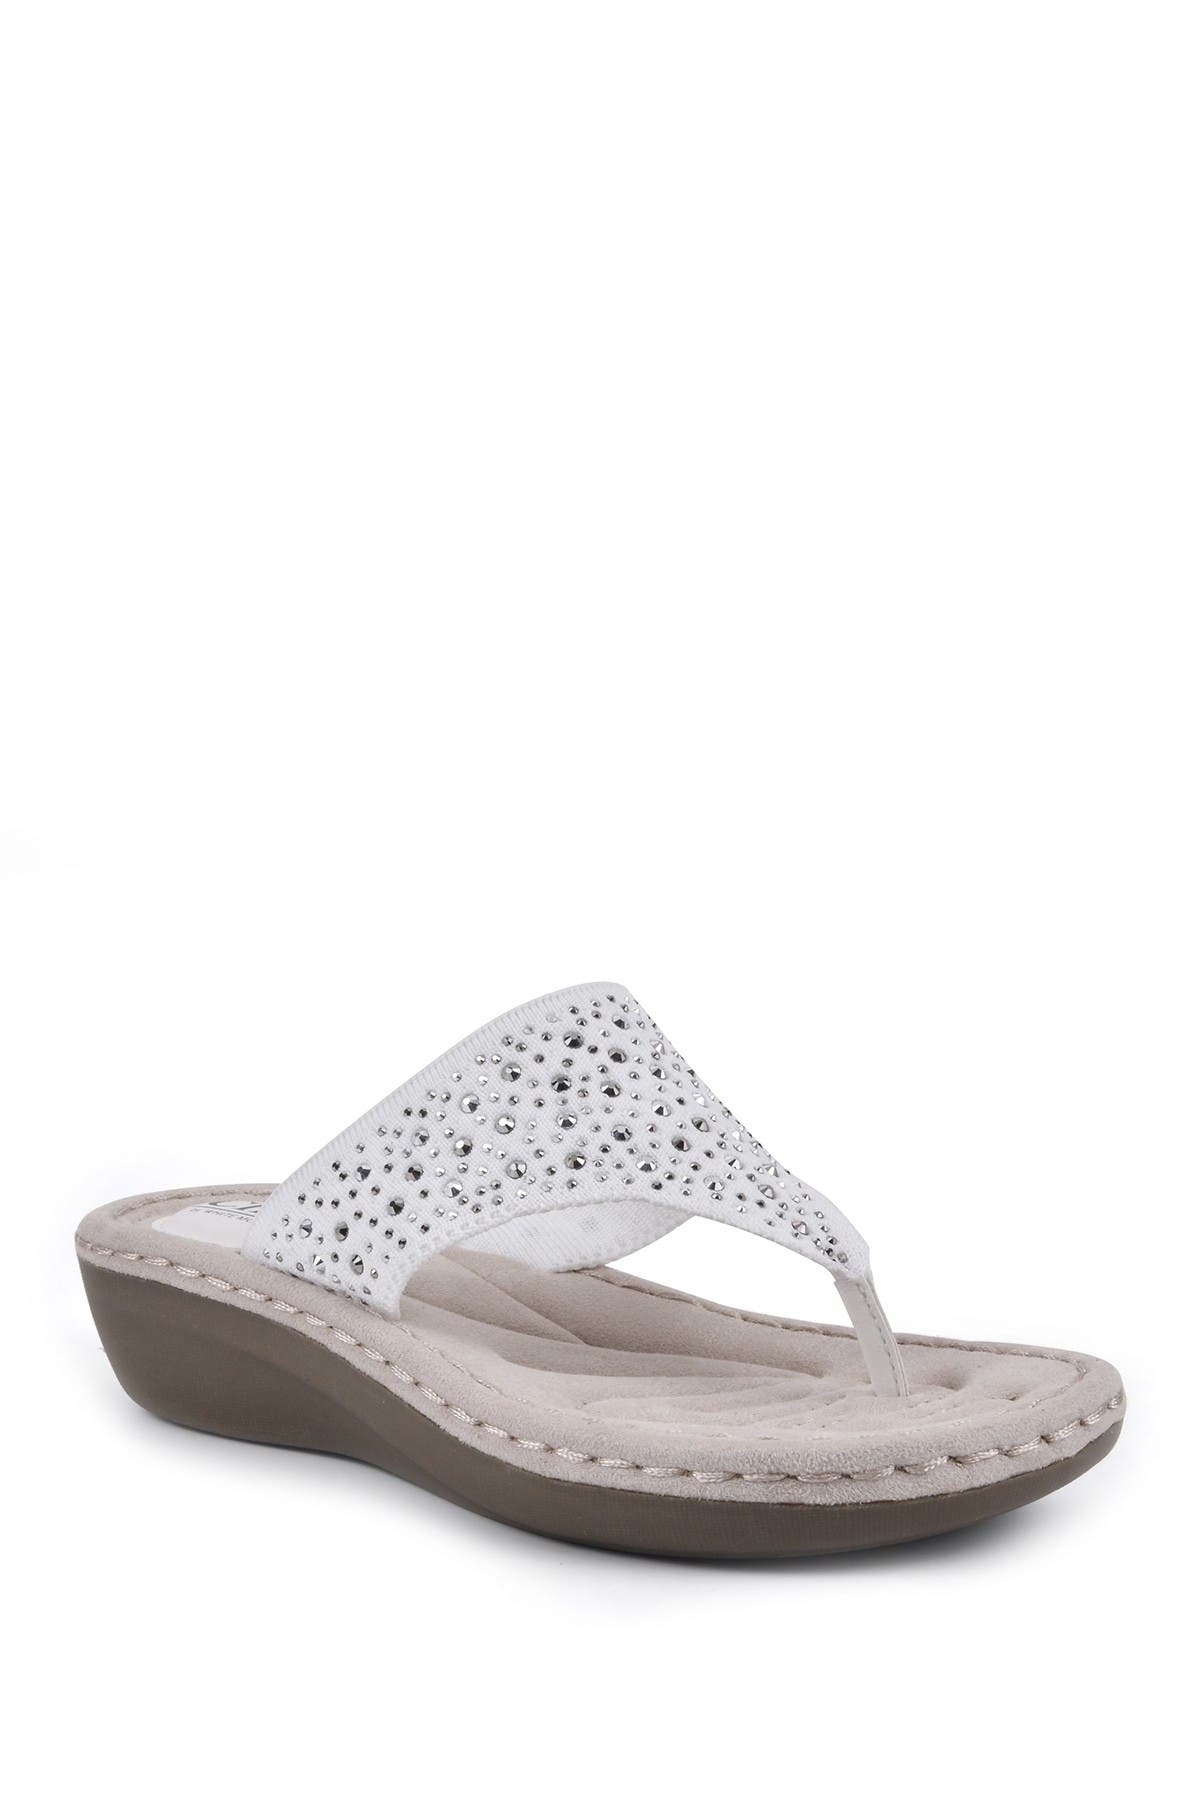 Cliffs By White Mountain CALLING THONG COMFORT SANDAL